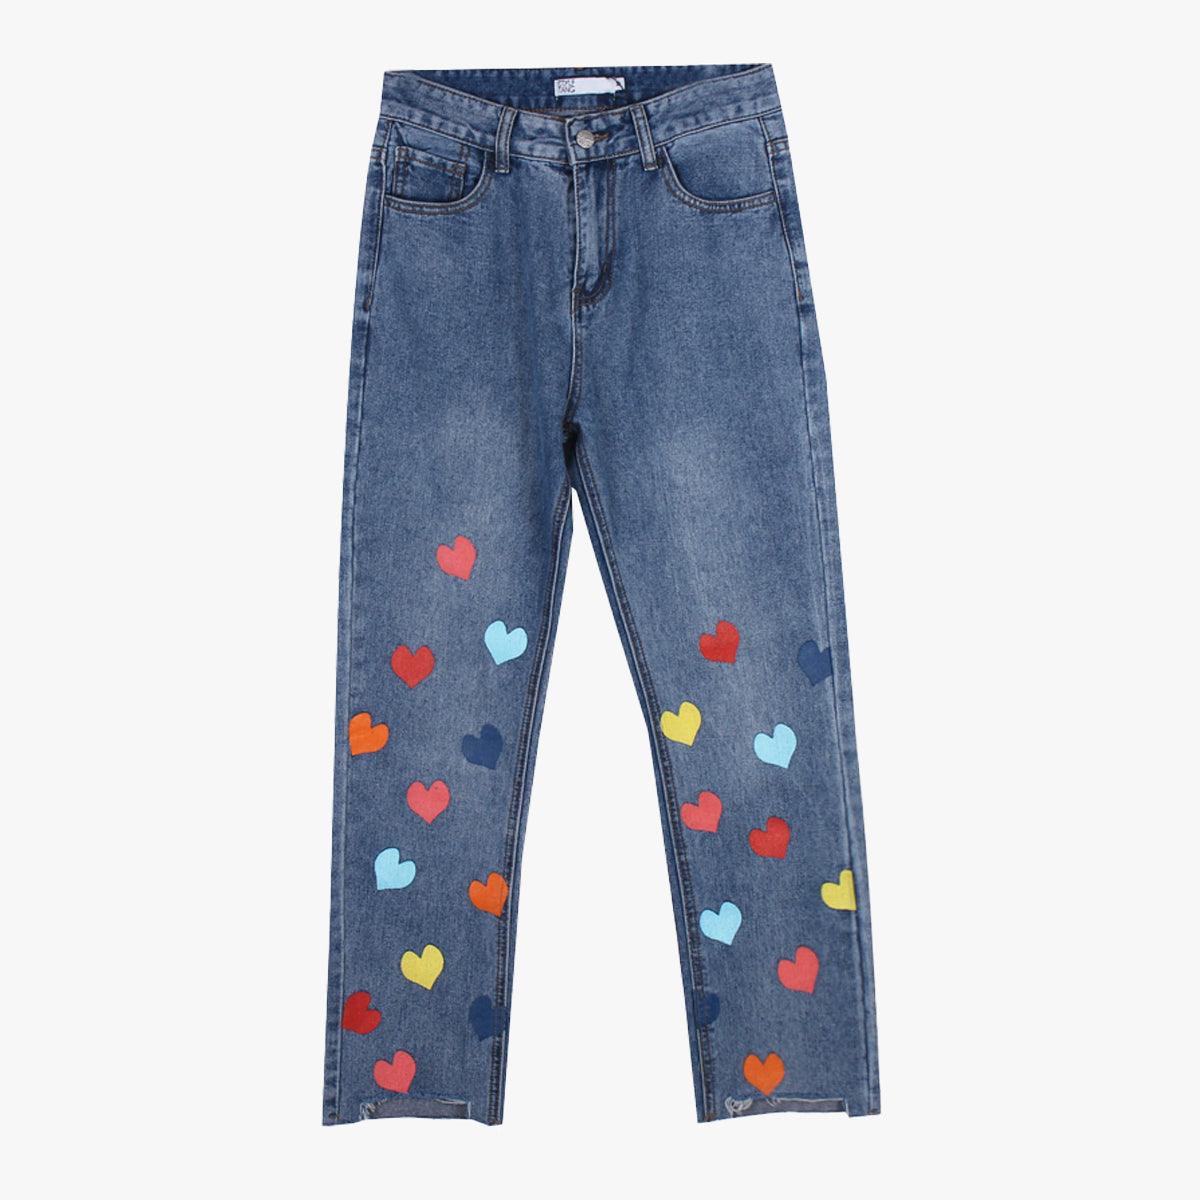 Colored Hearts Kidcore Aesthetic Jeans - Aesthetic Clothes Shop